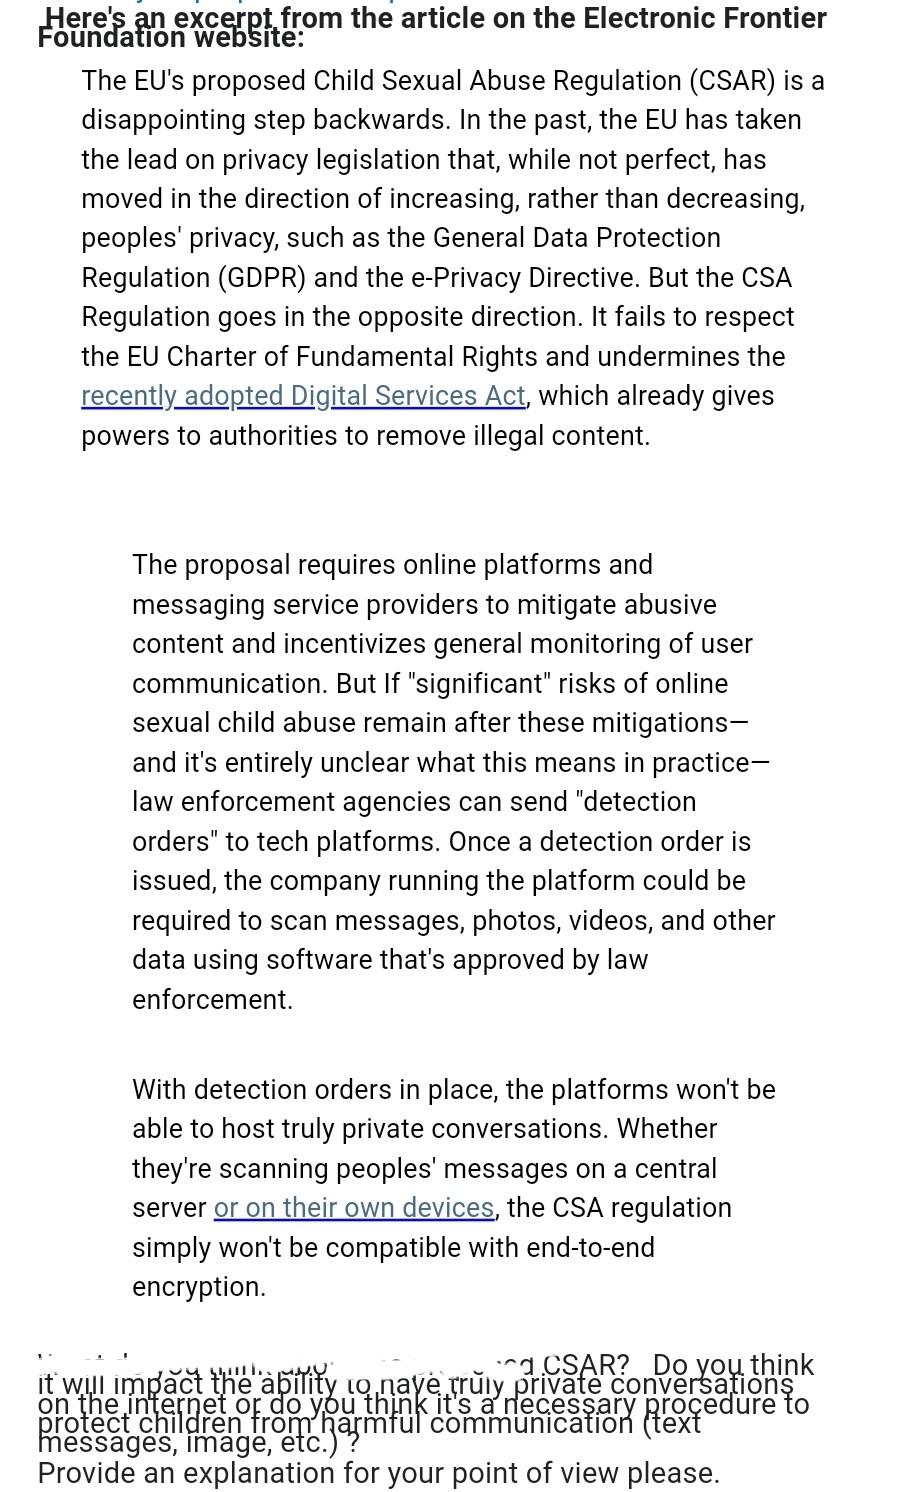 Here's an excerpt from the article on the Electronic Frontier
Foundation website:
The EU's proposed Child Sexual Abuse Regulation (CSAR) is a
disappointing step backwards. In the past, the EU has taken
the lead on privacy legislation that, while not perfect, has
moved in the direction of increasing, rather than decreasing,
peoples' privacy, such as the General Data Protection
Regulation (GDPR) and the e-Privacy Directive. But the CSA
Regulation goes in the opposite direction. It fails to respect
the EU Charter of Fundamental Rights and undermines the
recently adopted Digital Services Act, which already gives
powers to authorities to remove illegal content.
The proposal requires online platforms and
messaging service providers to mitigate abusive
content and incentivizes general monitoring of user
communication. But If "significant" risks of online
sexual child abuse remain after these mitigations-
and it's entirely unclear what this means in practice-
law enforcement agencies can send "detection
orders" to tech platforms. Once a detection order is
issued, the company running the platform could be
required to scan messages, photos, videos, and other
data using software that's approved by law
enforcement.
With detection orders in place, the platforms won't be
able to host truly private conversations. Whether
they're scanning peoples' messages on a central
server or on their own devices, the CSA regulation
simply won't be compatible with end-to-end
encryption.
CSAR? Do you think
it will impact the ability to naye truly private conversations
on the internet or do you think it's a necessary procedure to
messages, image, etc.jarmful communication (text
Provide an explanation for your point of view please.